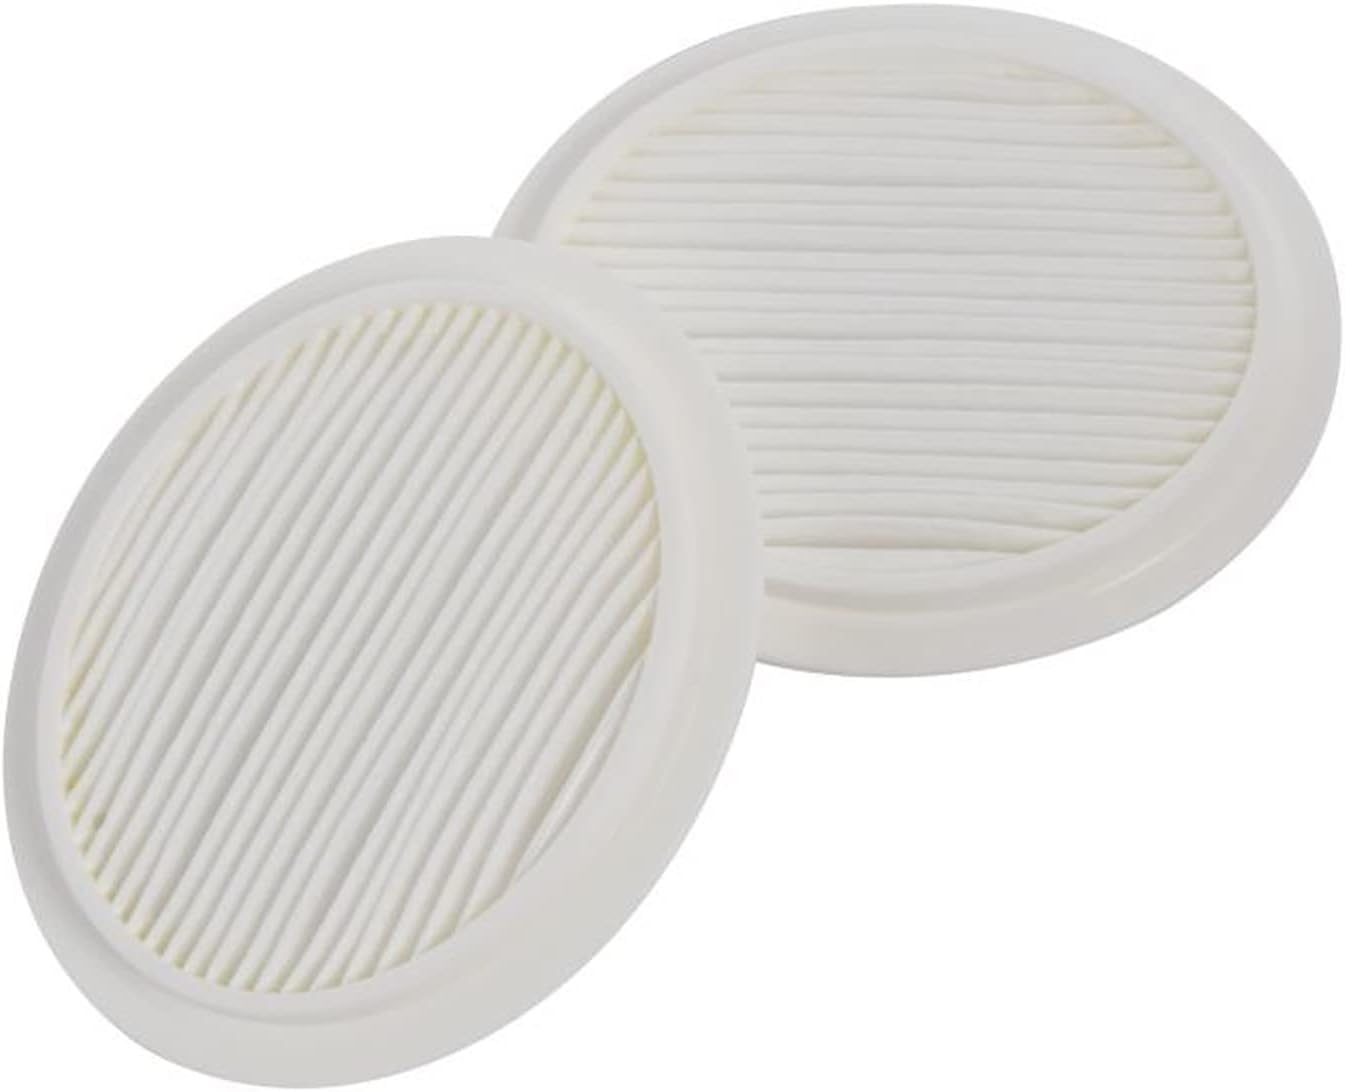 Trend Replacement P100 Filters (5 x 1 Pair) for The Trend Air Stealth Half Mask, HEPAC Filtration, NIOSH P100, APF10 x WEL, STEALTH/4/5